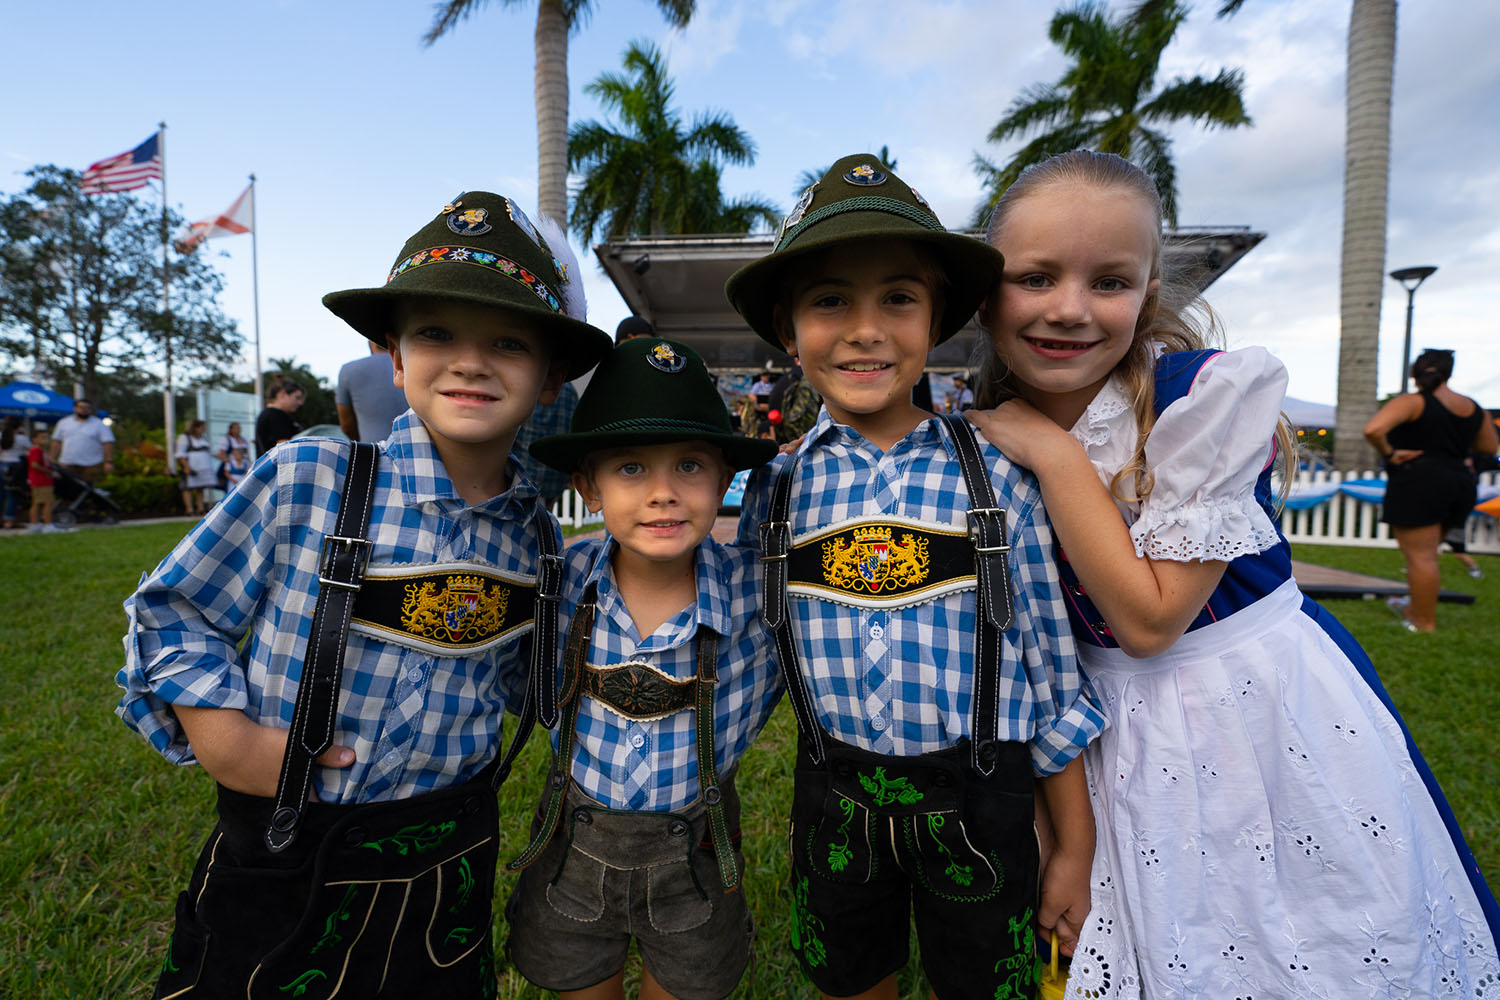 Oktoberfest Draws Locals to Celebrate Bavarian Culture in Coral Springs